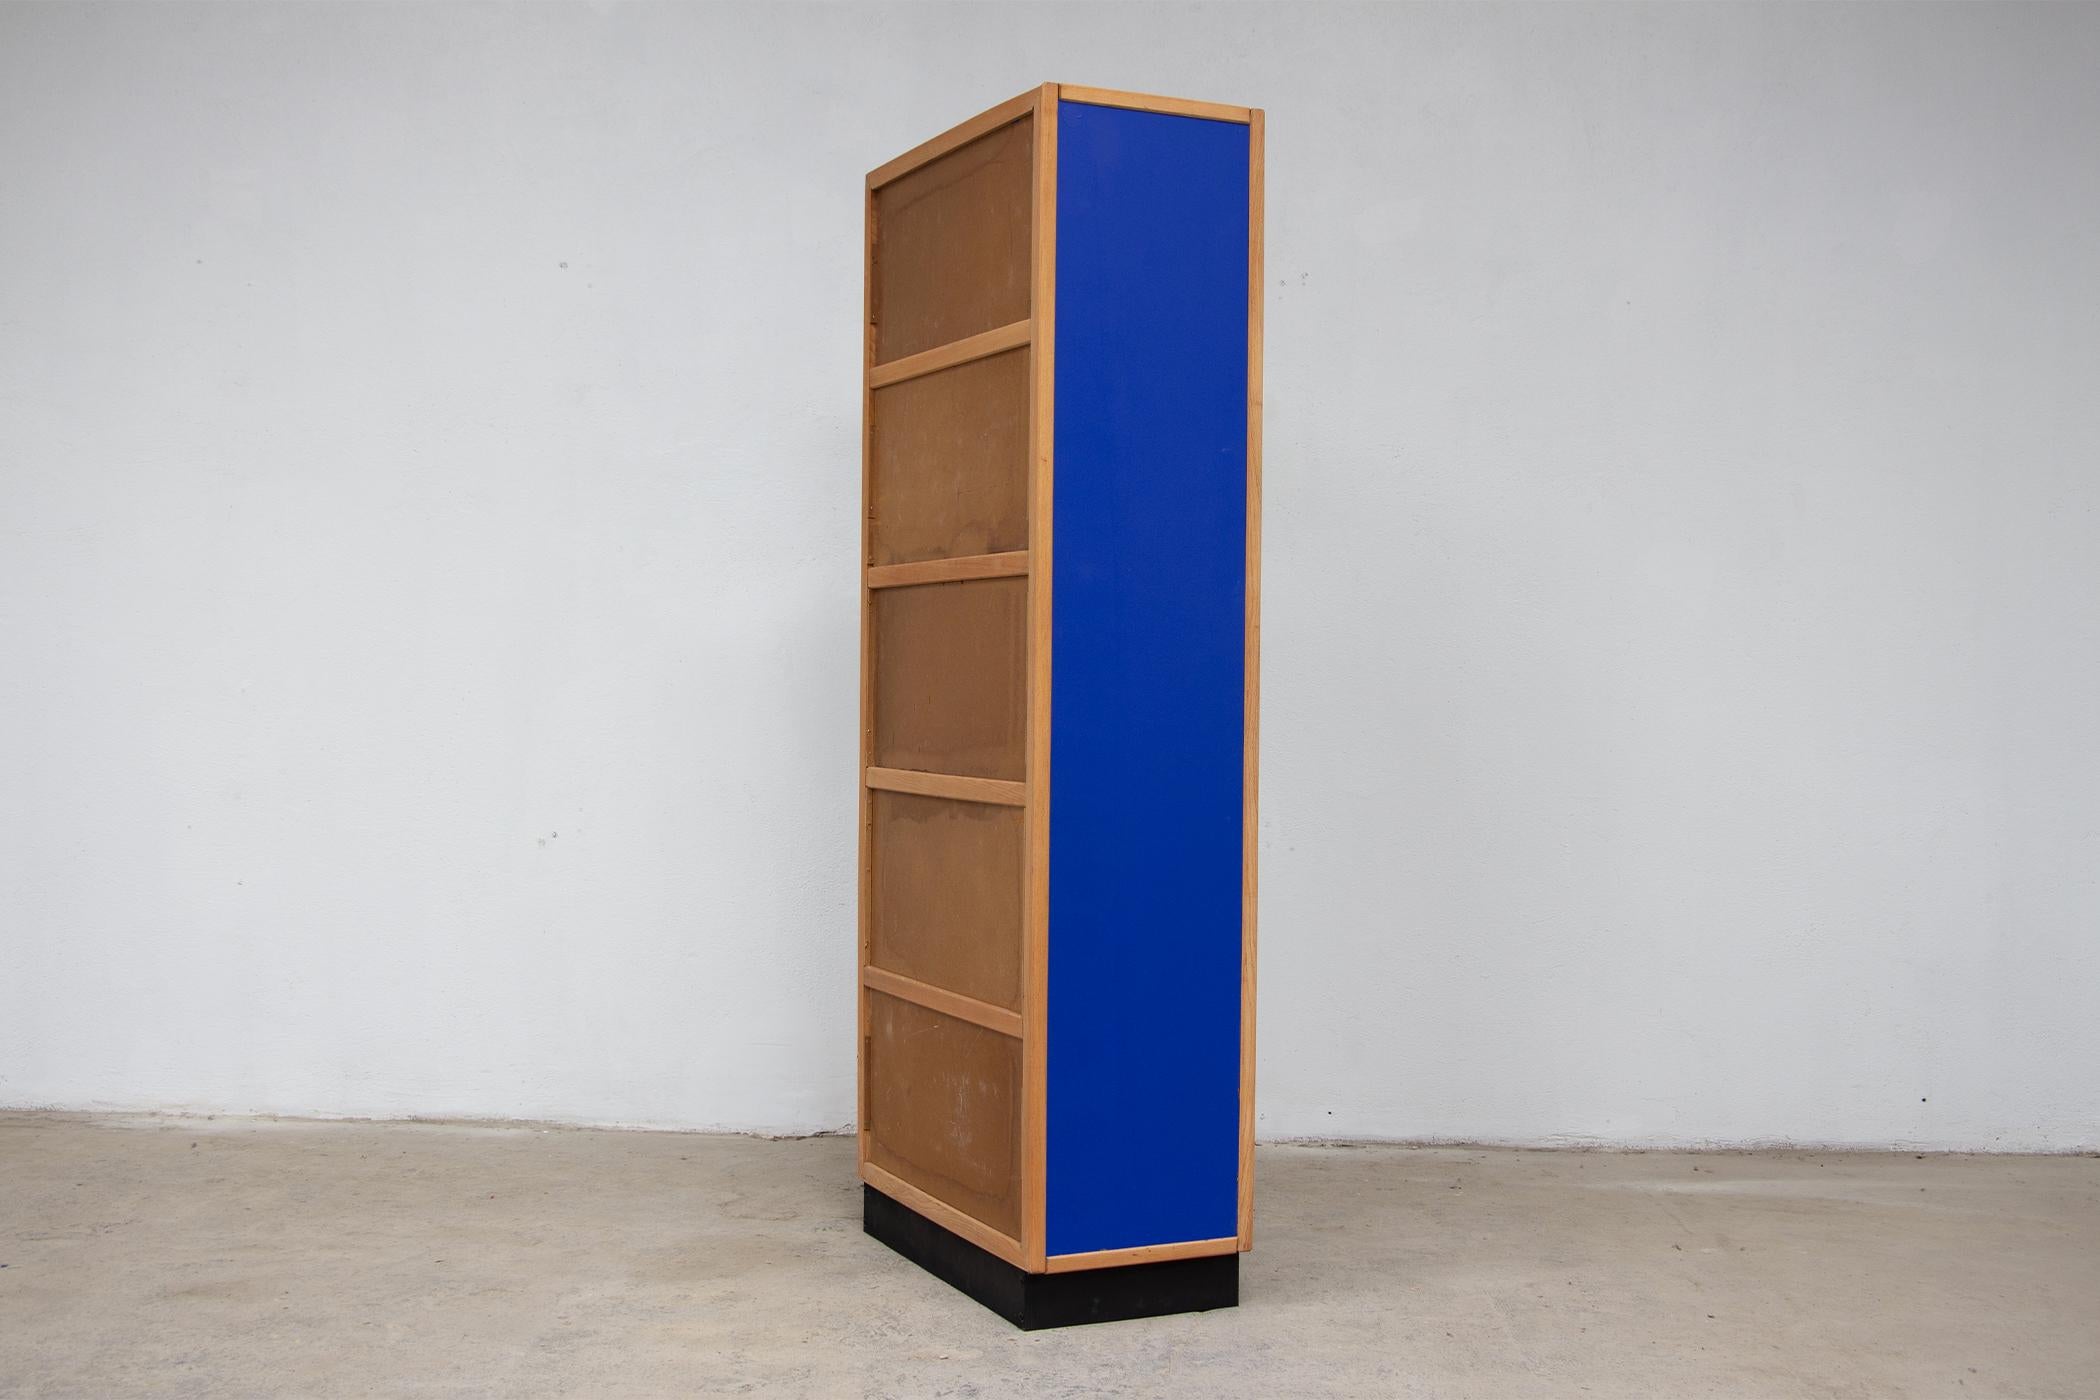 Vintage bookcase from the 60's by designer and publisher André Sornay, famous Lyon cabinetmaker and master of art deco furniture.
Stamped with the Sornay sticker.
Electric blue panels close to Yves Klein blue, new white laminated interior panels.